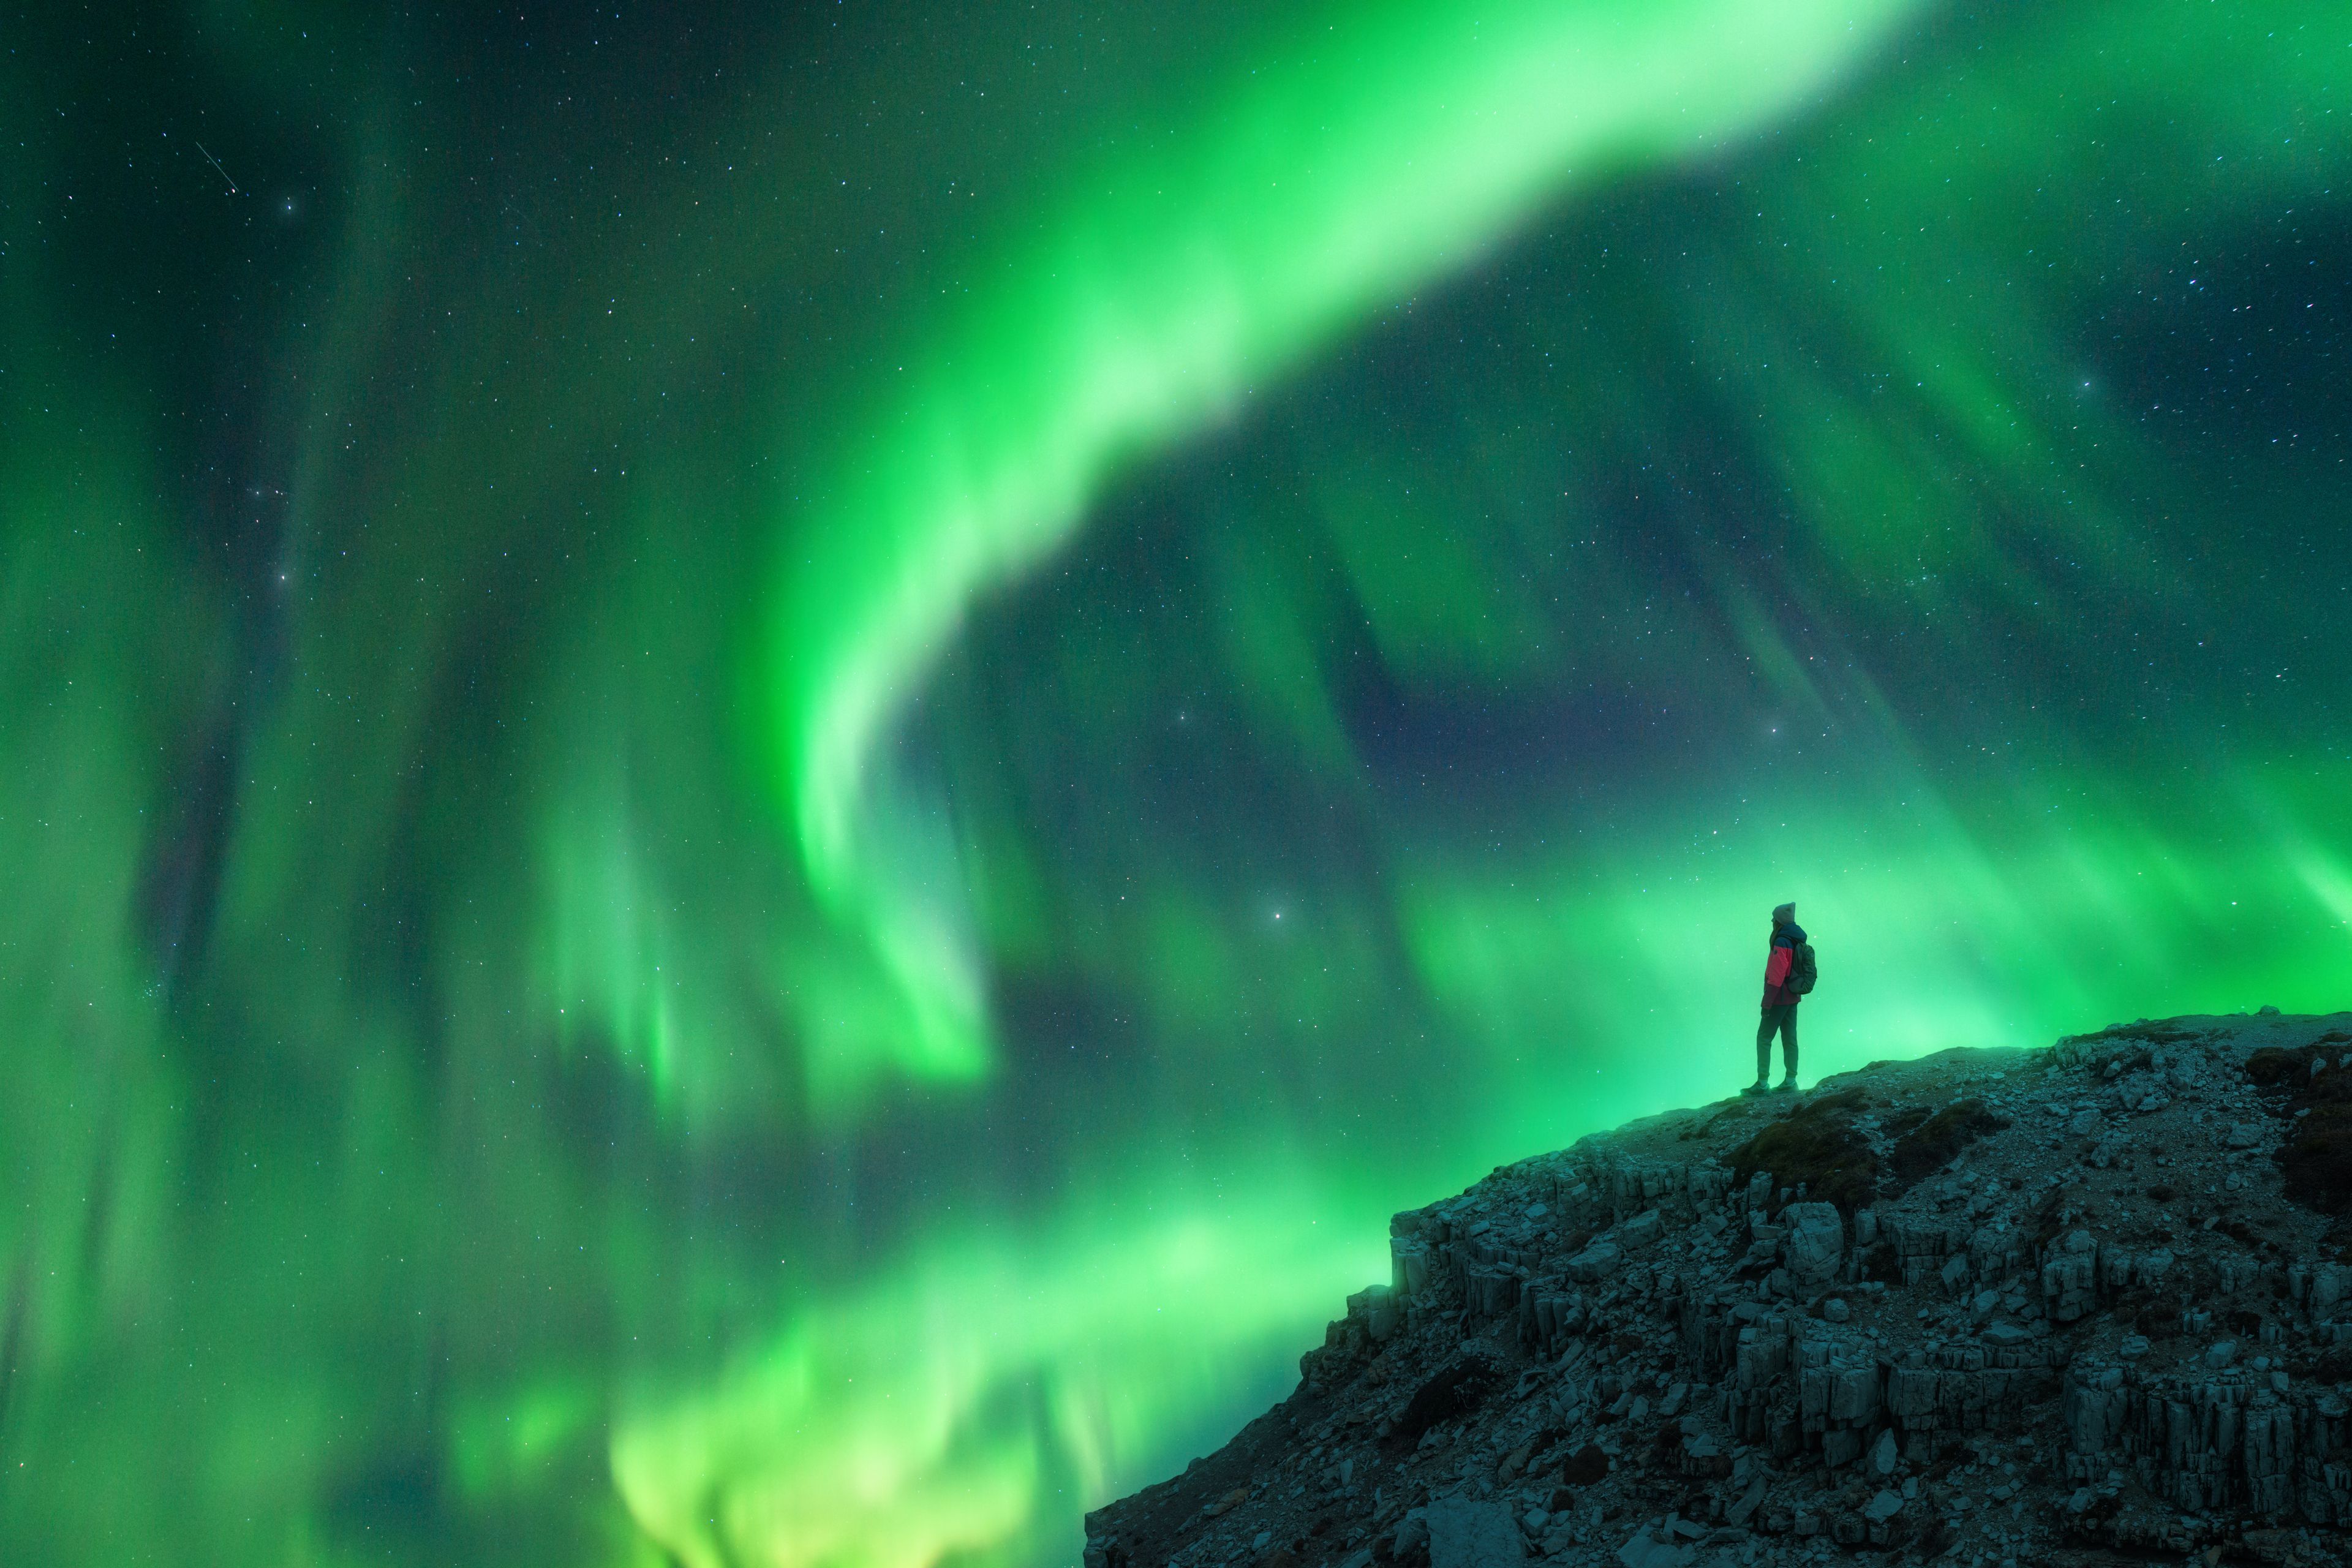 a person found Northern Lights during her winter vacation in iceland in february